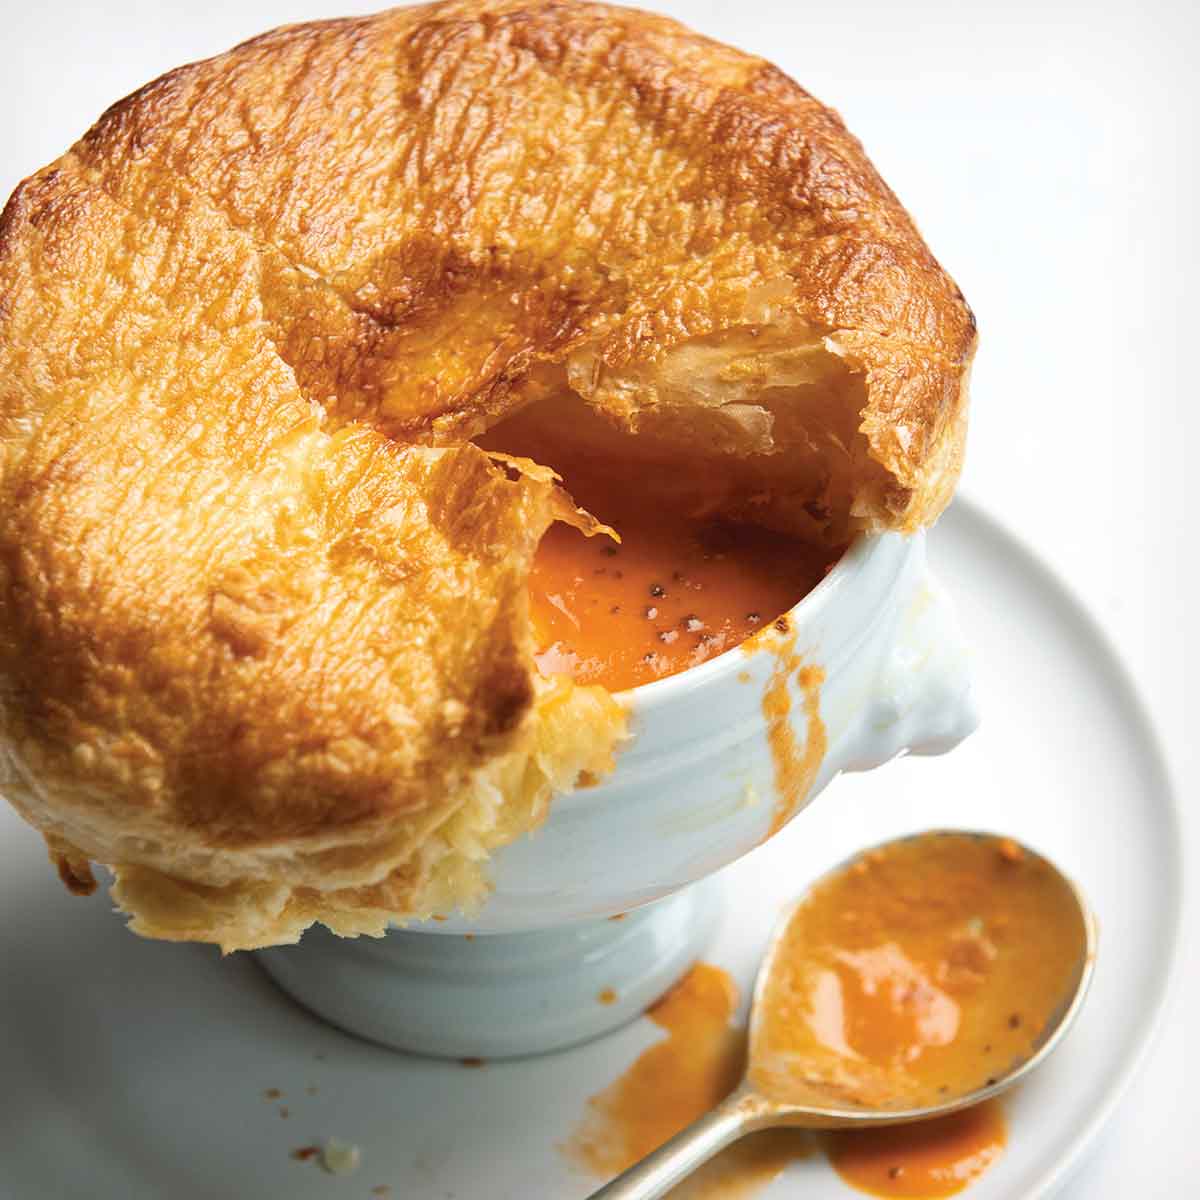 Clove-infused tomato soup in a white bowl, topped with a flaky pastry lid, on a plate with a spoon.